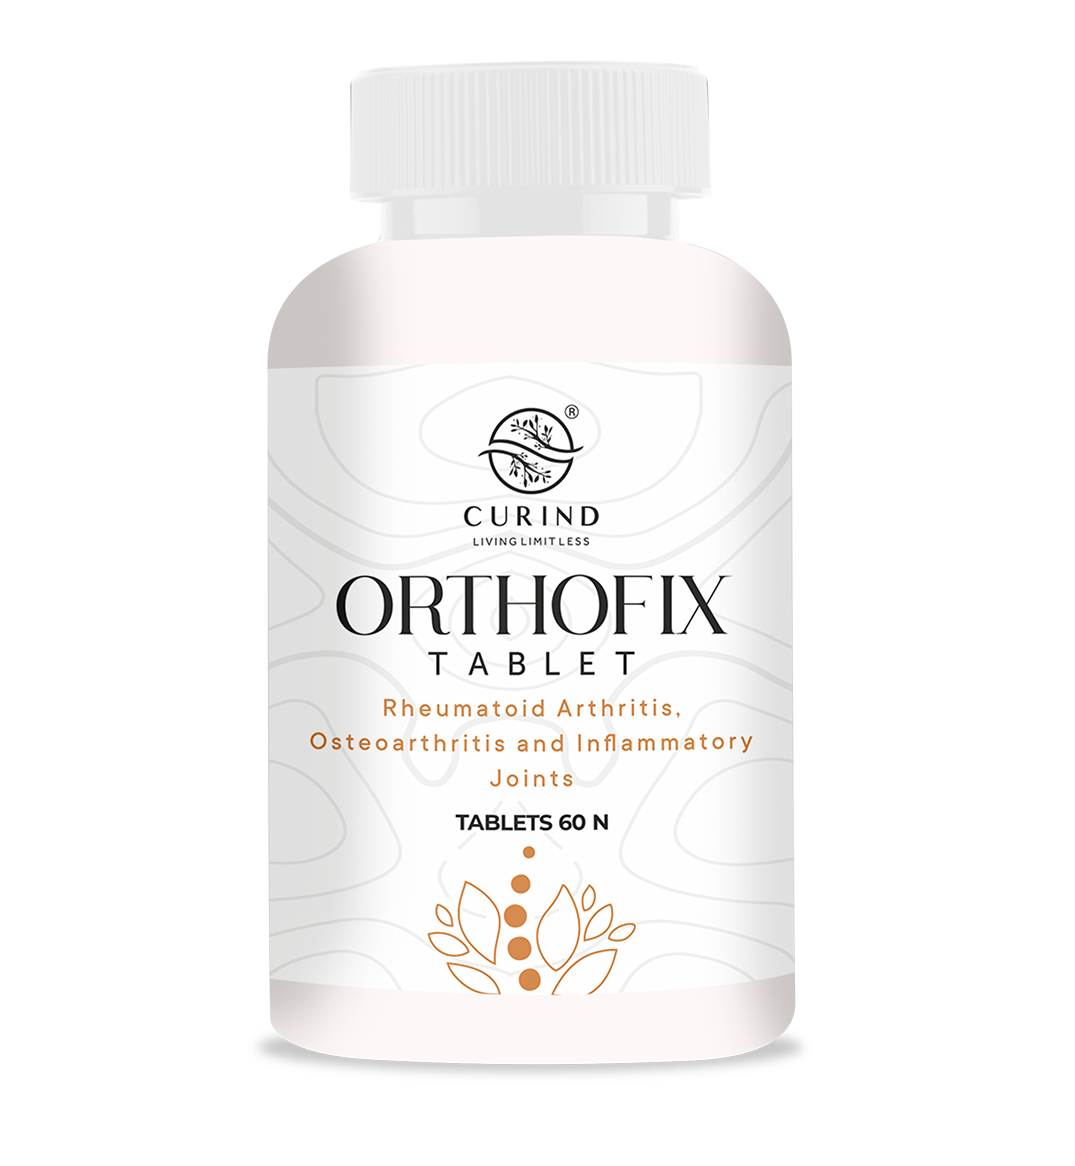 Orthofix tablets- best ayurvedic medicine for joint pain